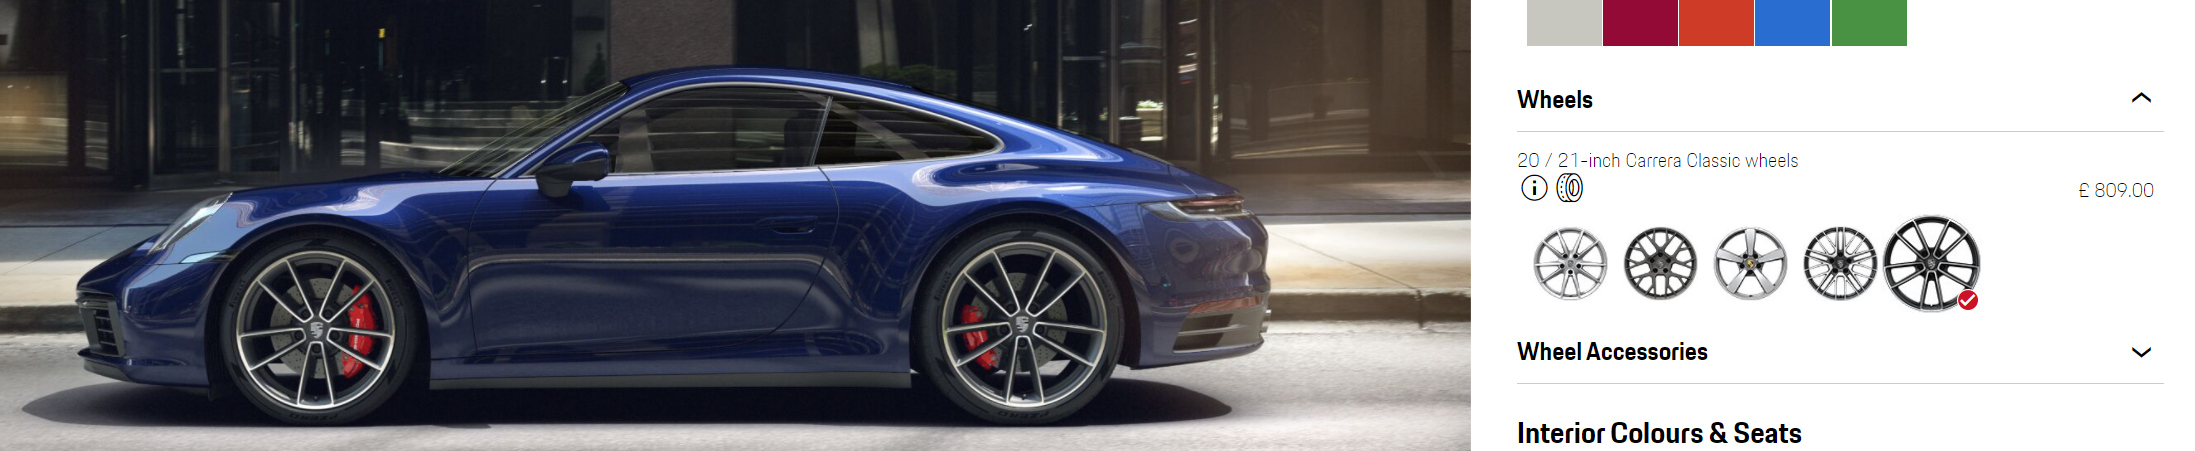 Porsche Taycan What wheels are these? 1640176693261